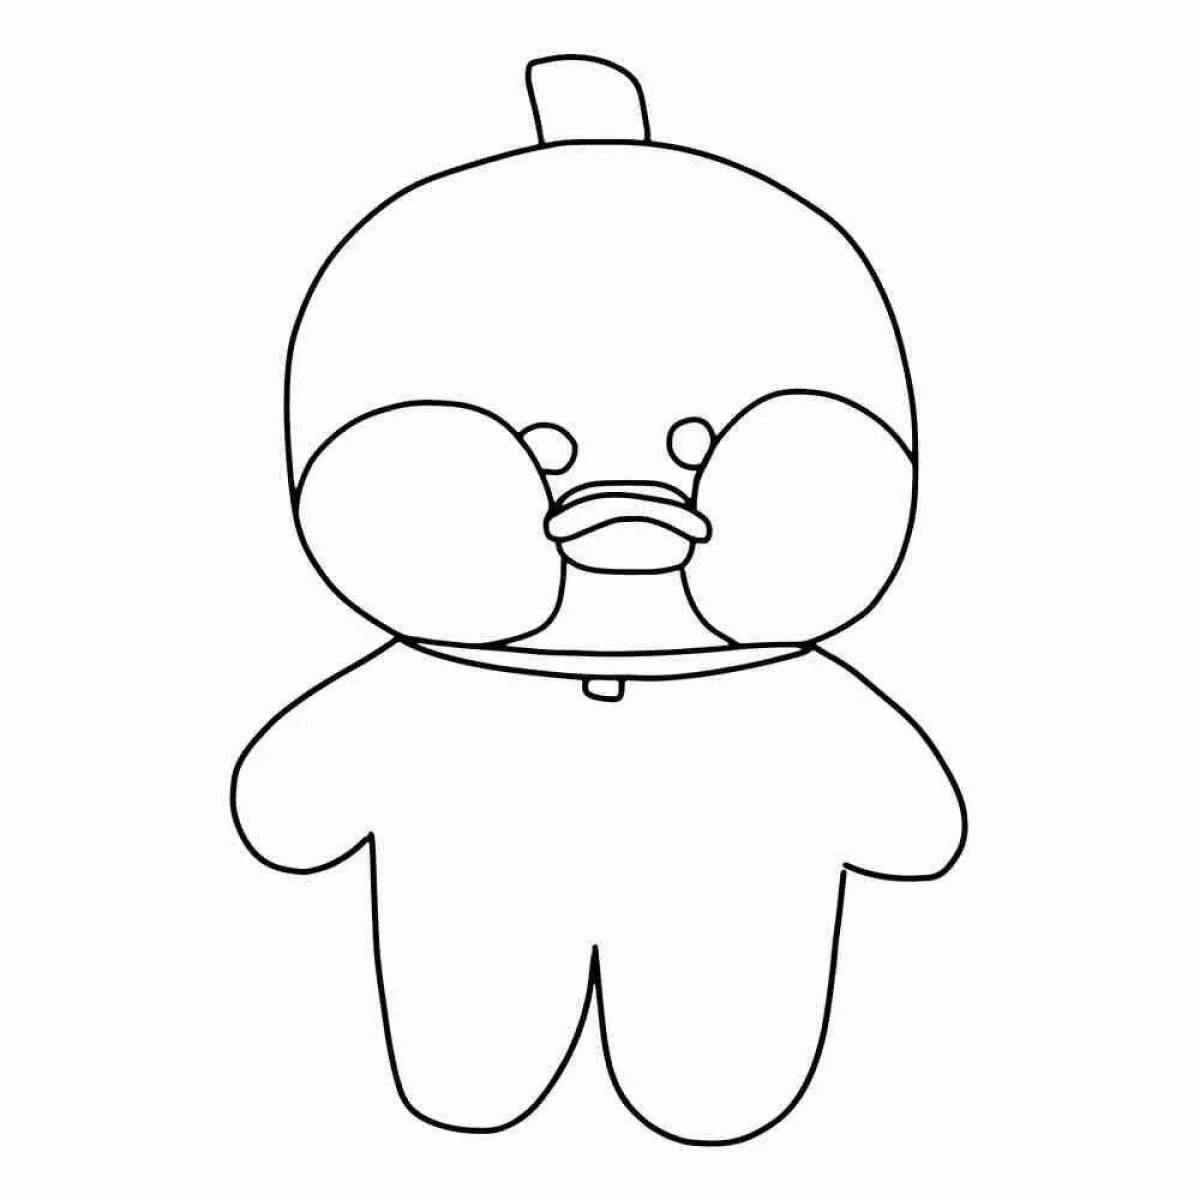 Coloured funny Lafanfan duck coloring book